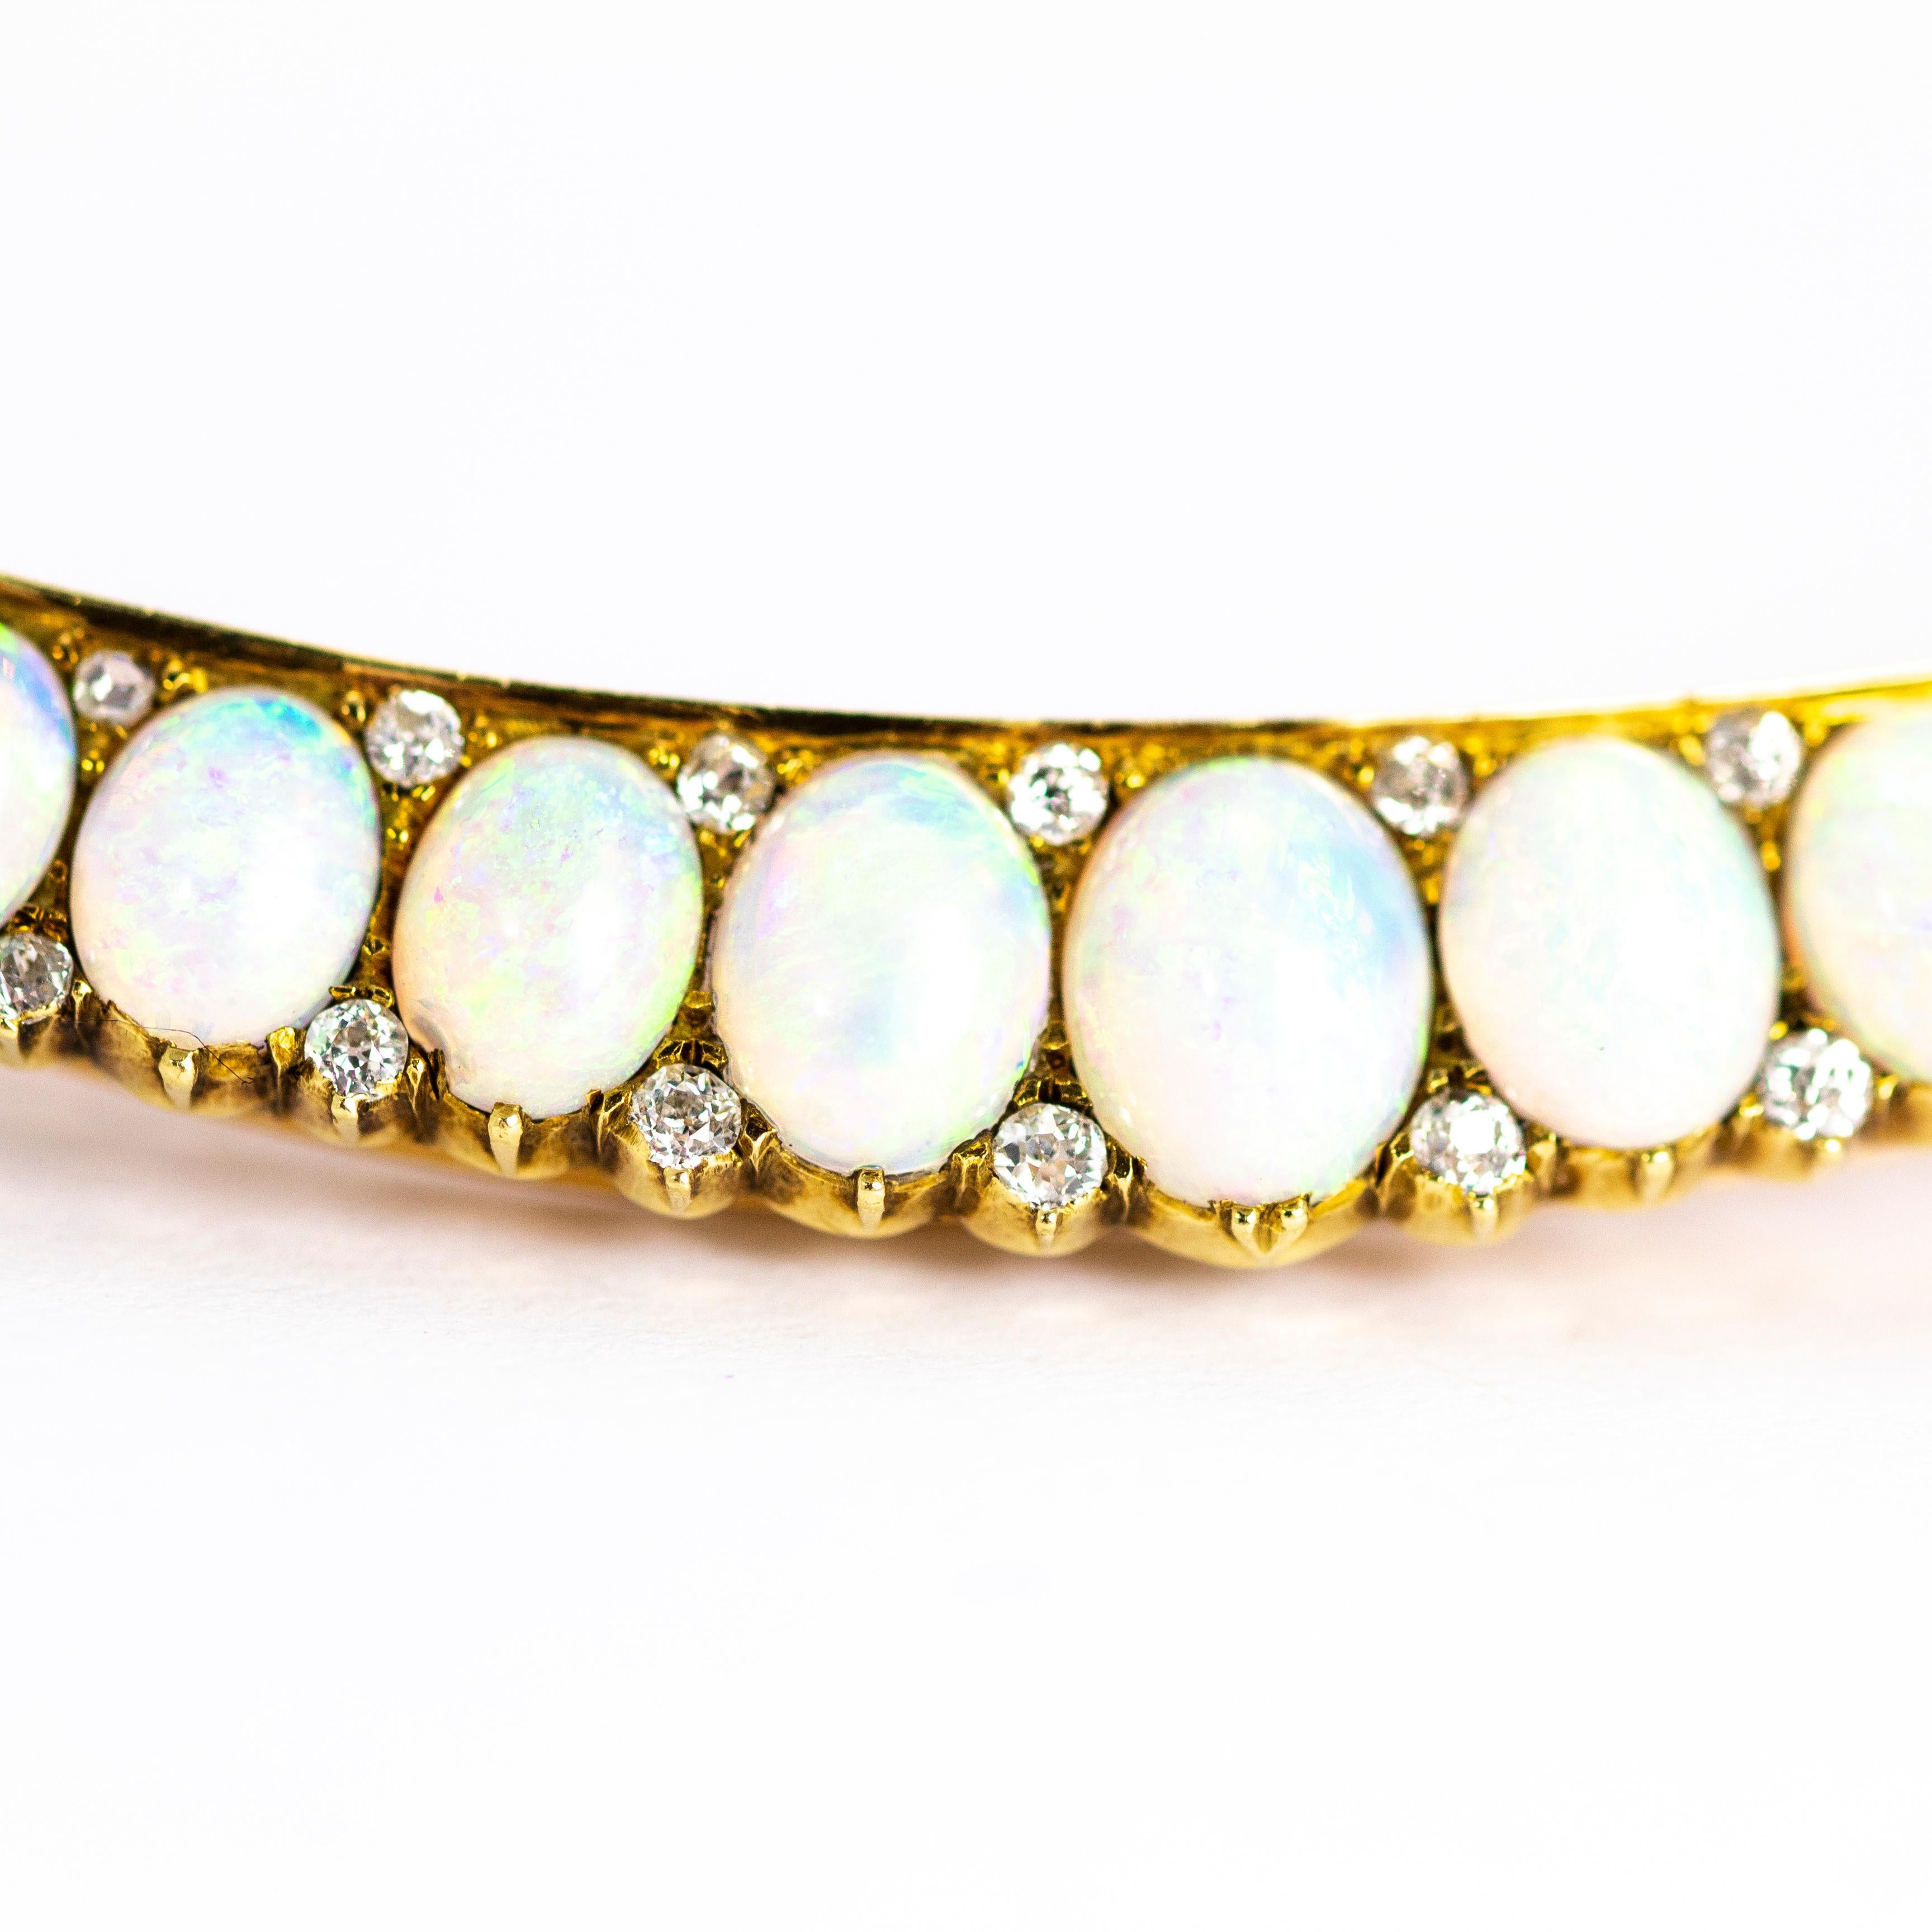 An exquisite large vintage crescent brooch fully set with opals and diamonds. The 23 spectacular graduated opal cabochons with fantastic height, each of these stones is from the same source and so share the same exceptional colour throughout. The